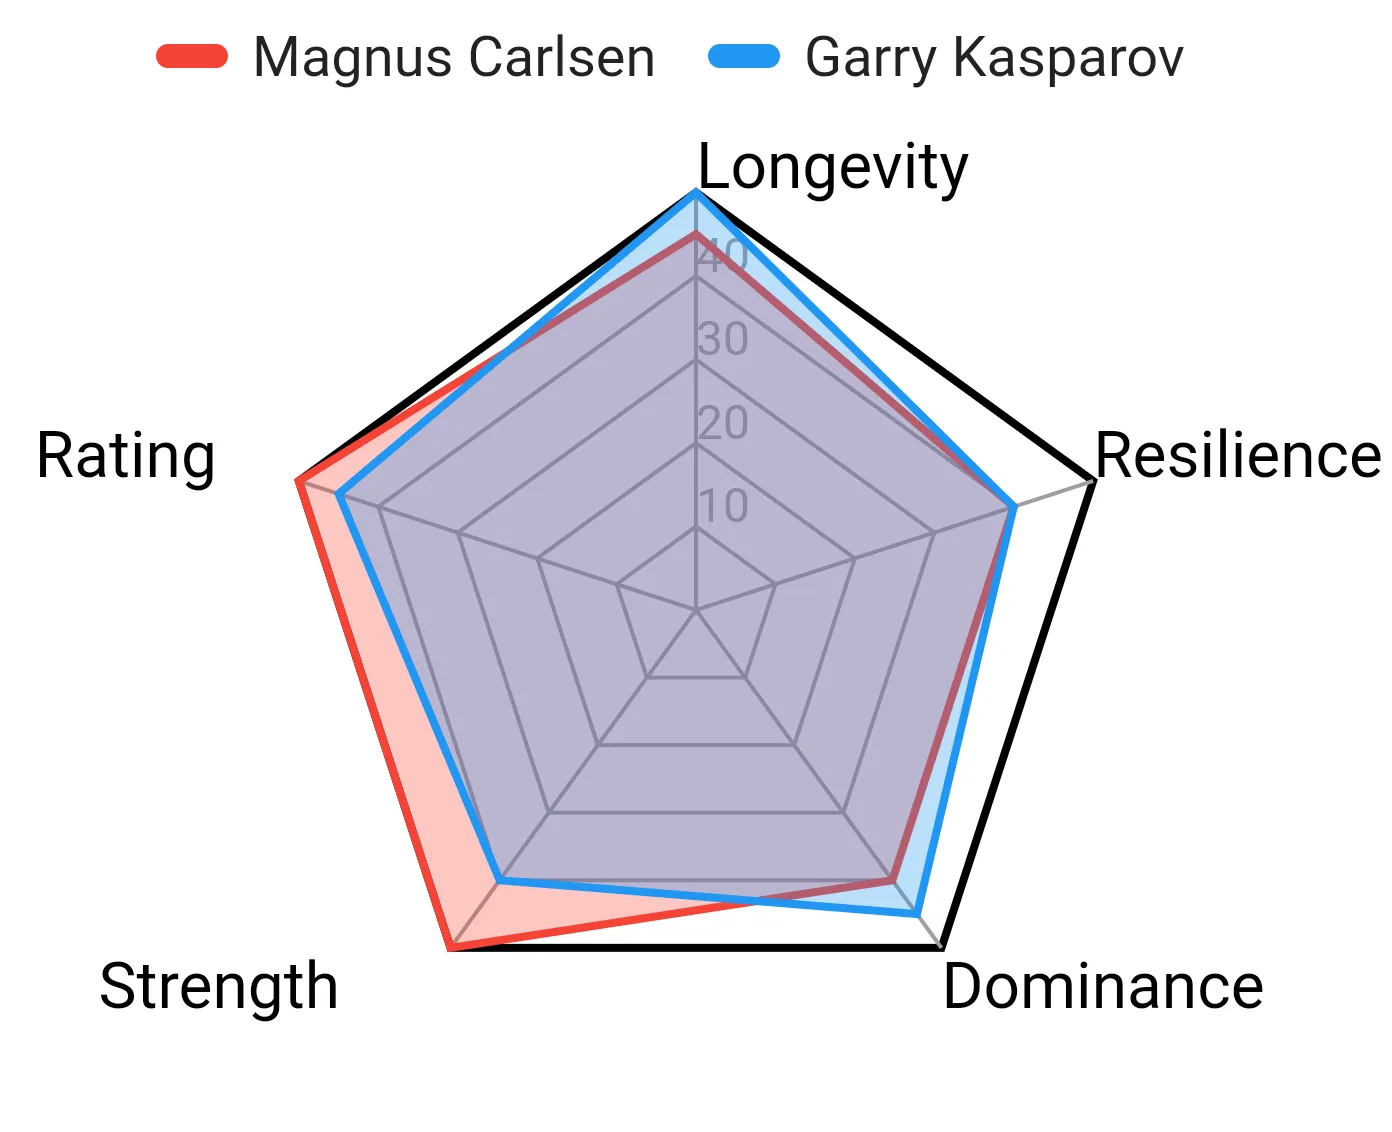 This is a summary chart of what is to be discussed below. It is a comparison graphic between Magnus Carlsen and Garry kasparov (and who's better). 